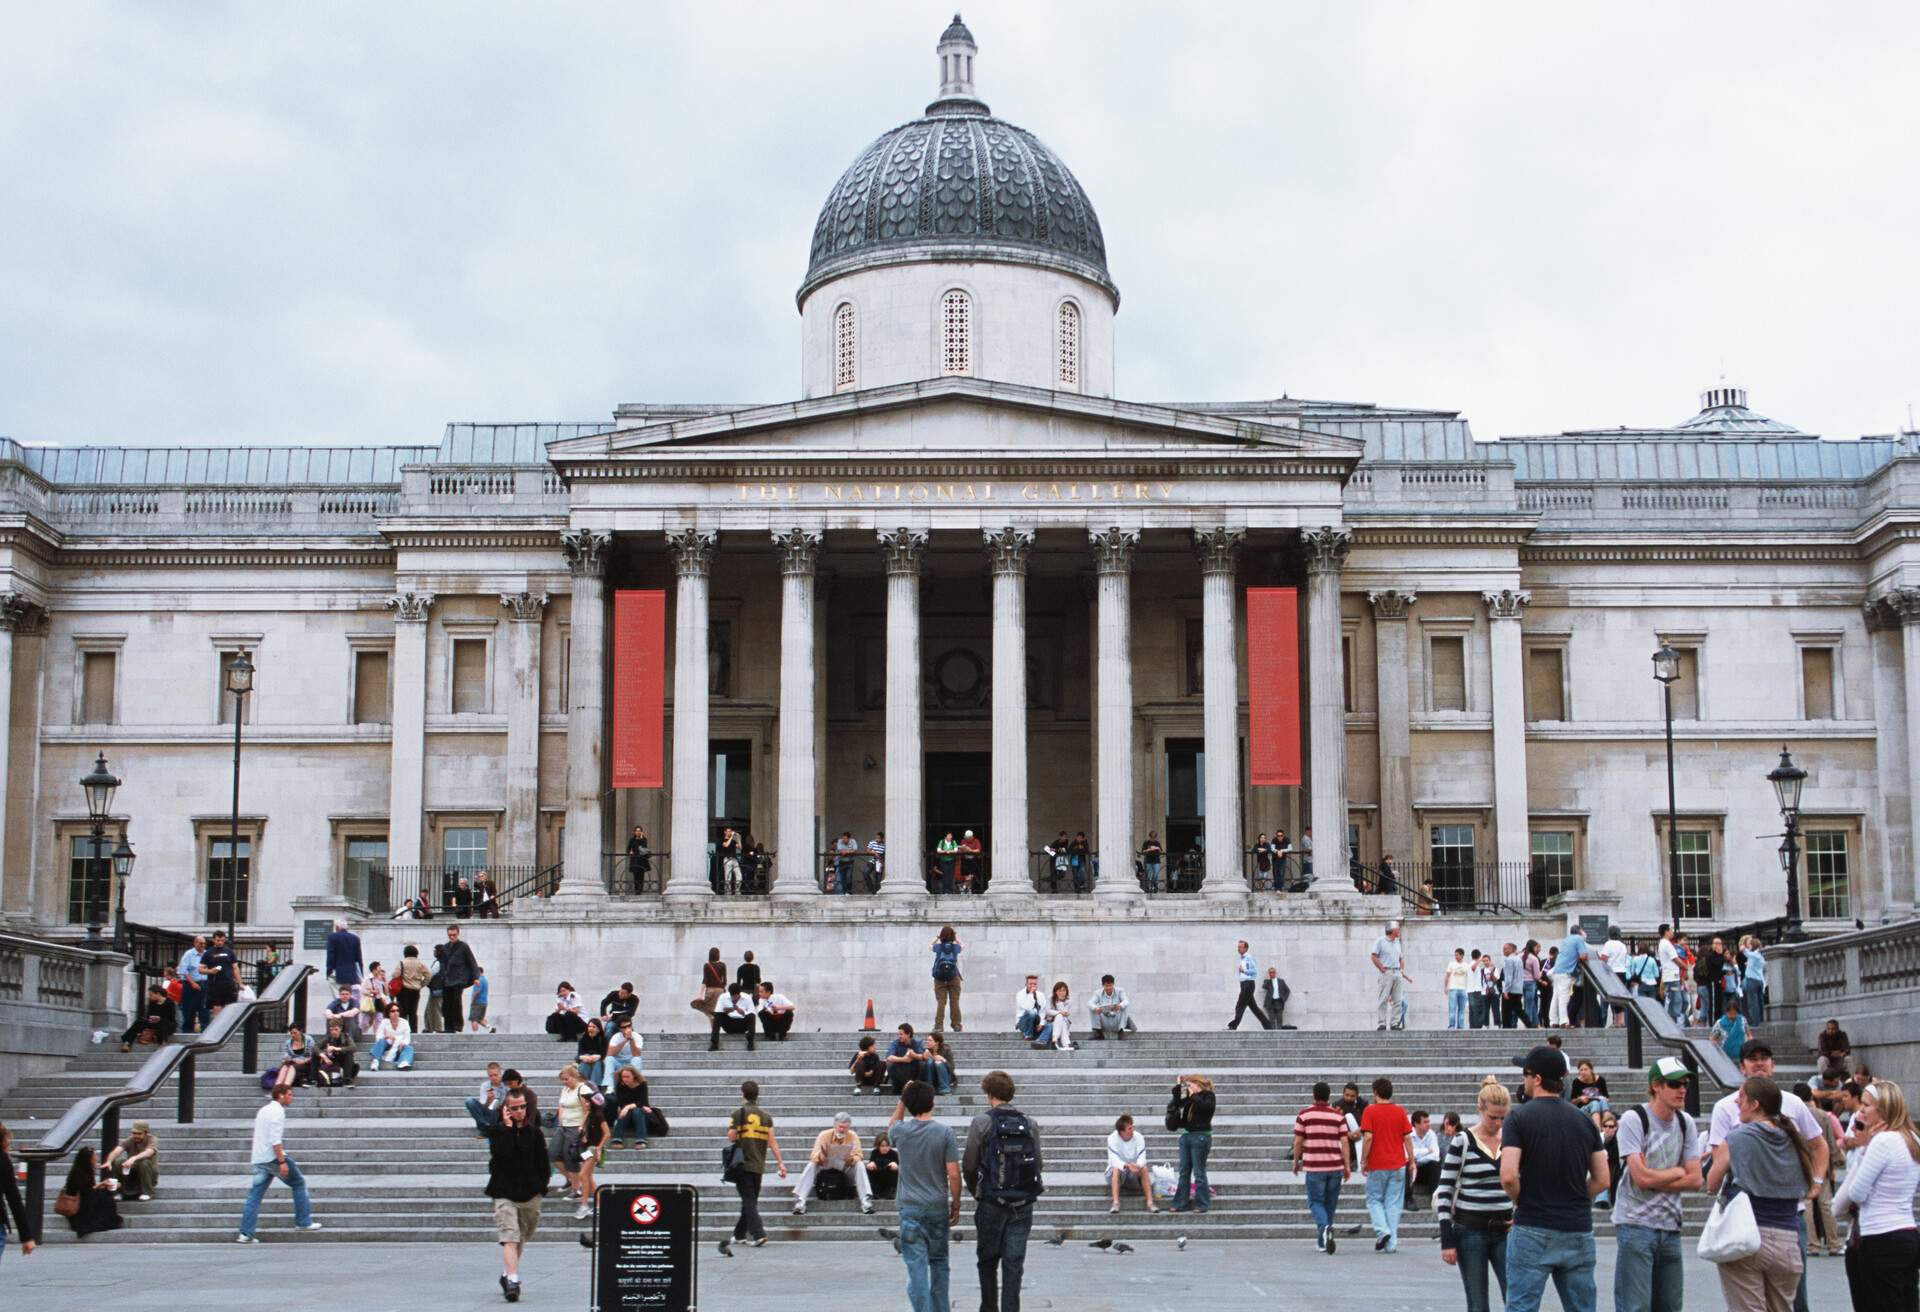 National Gallery is a neoclassical museum that features a crowded front staircase, a pillared porch, and dome roof.